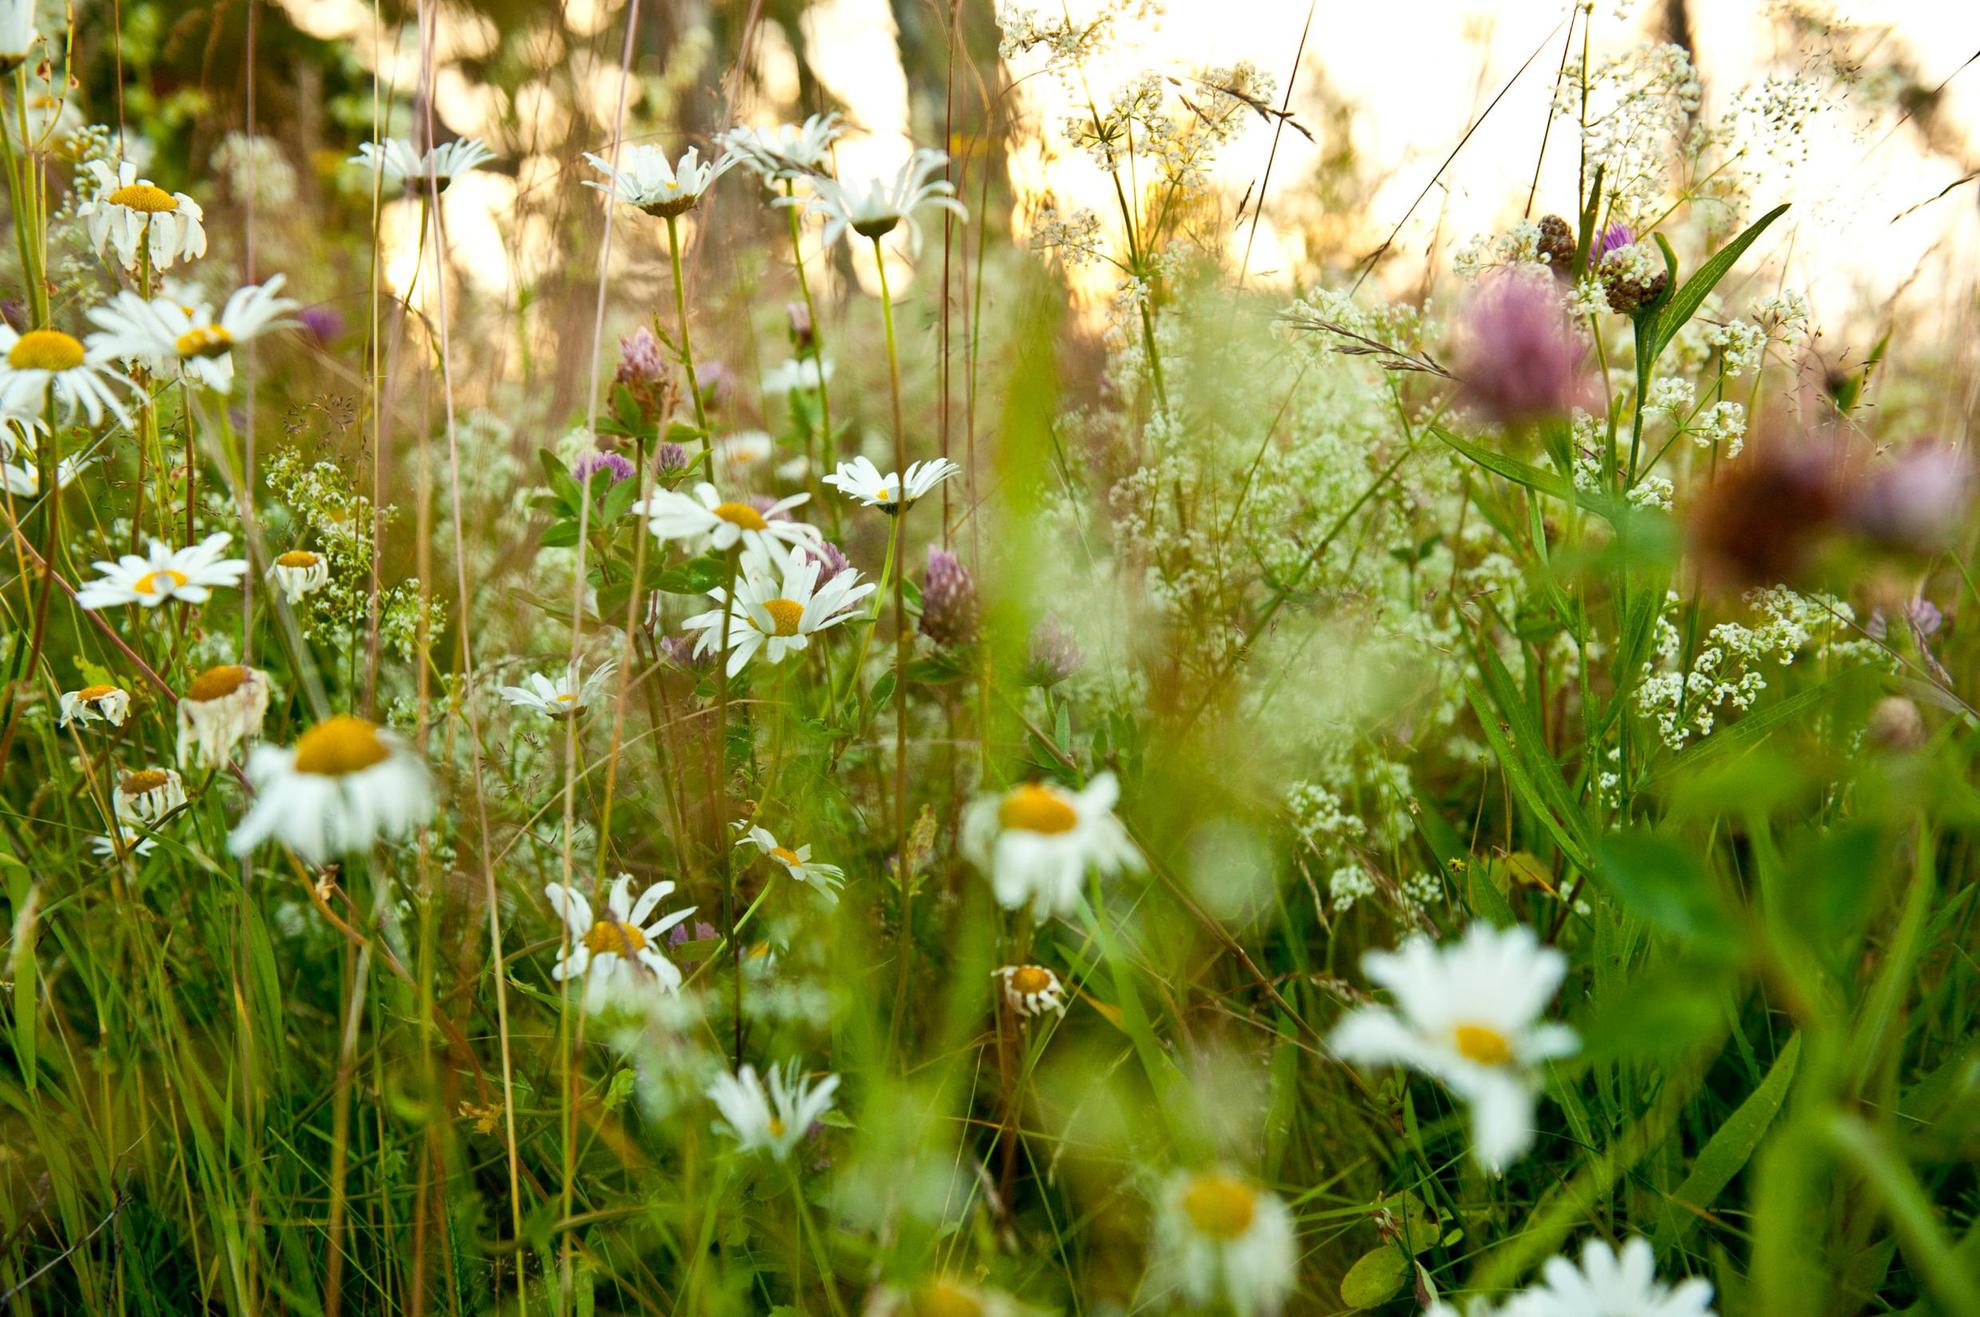 A variety of wild flowers in a field.